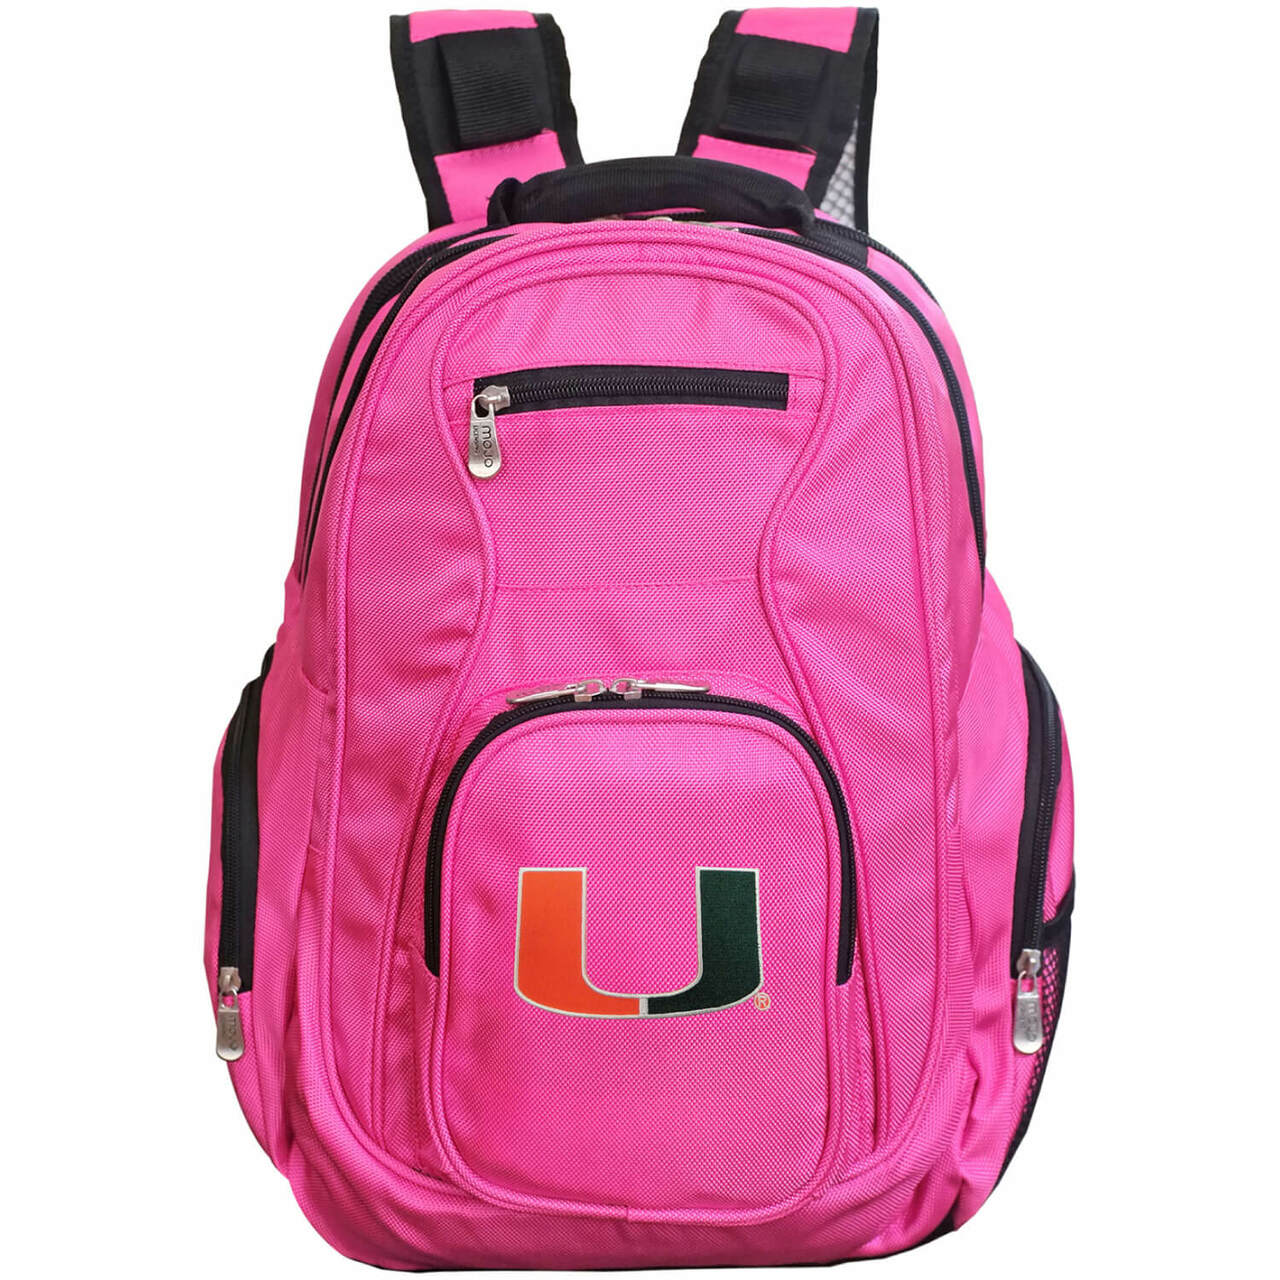 Miami Hurricanes Laptop Backpack Pink